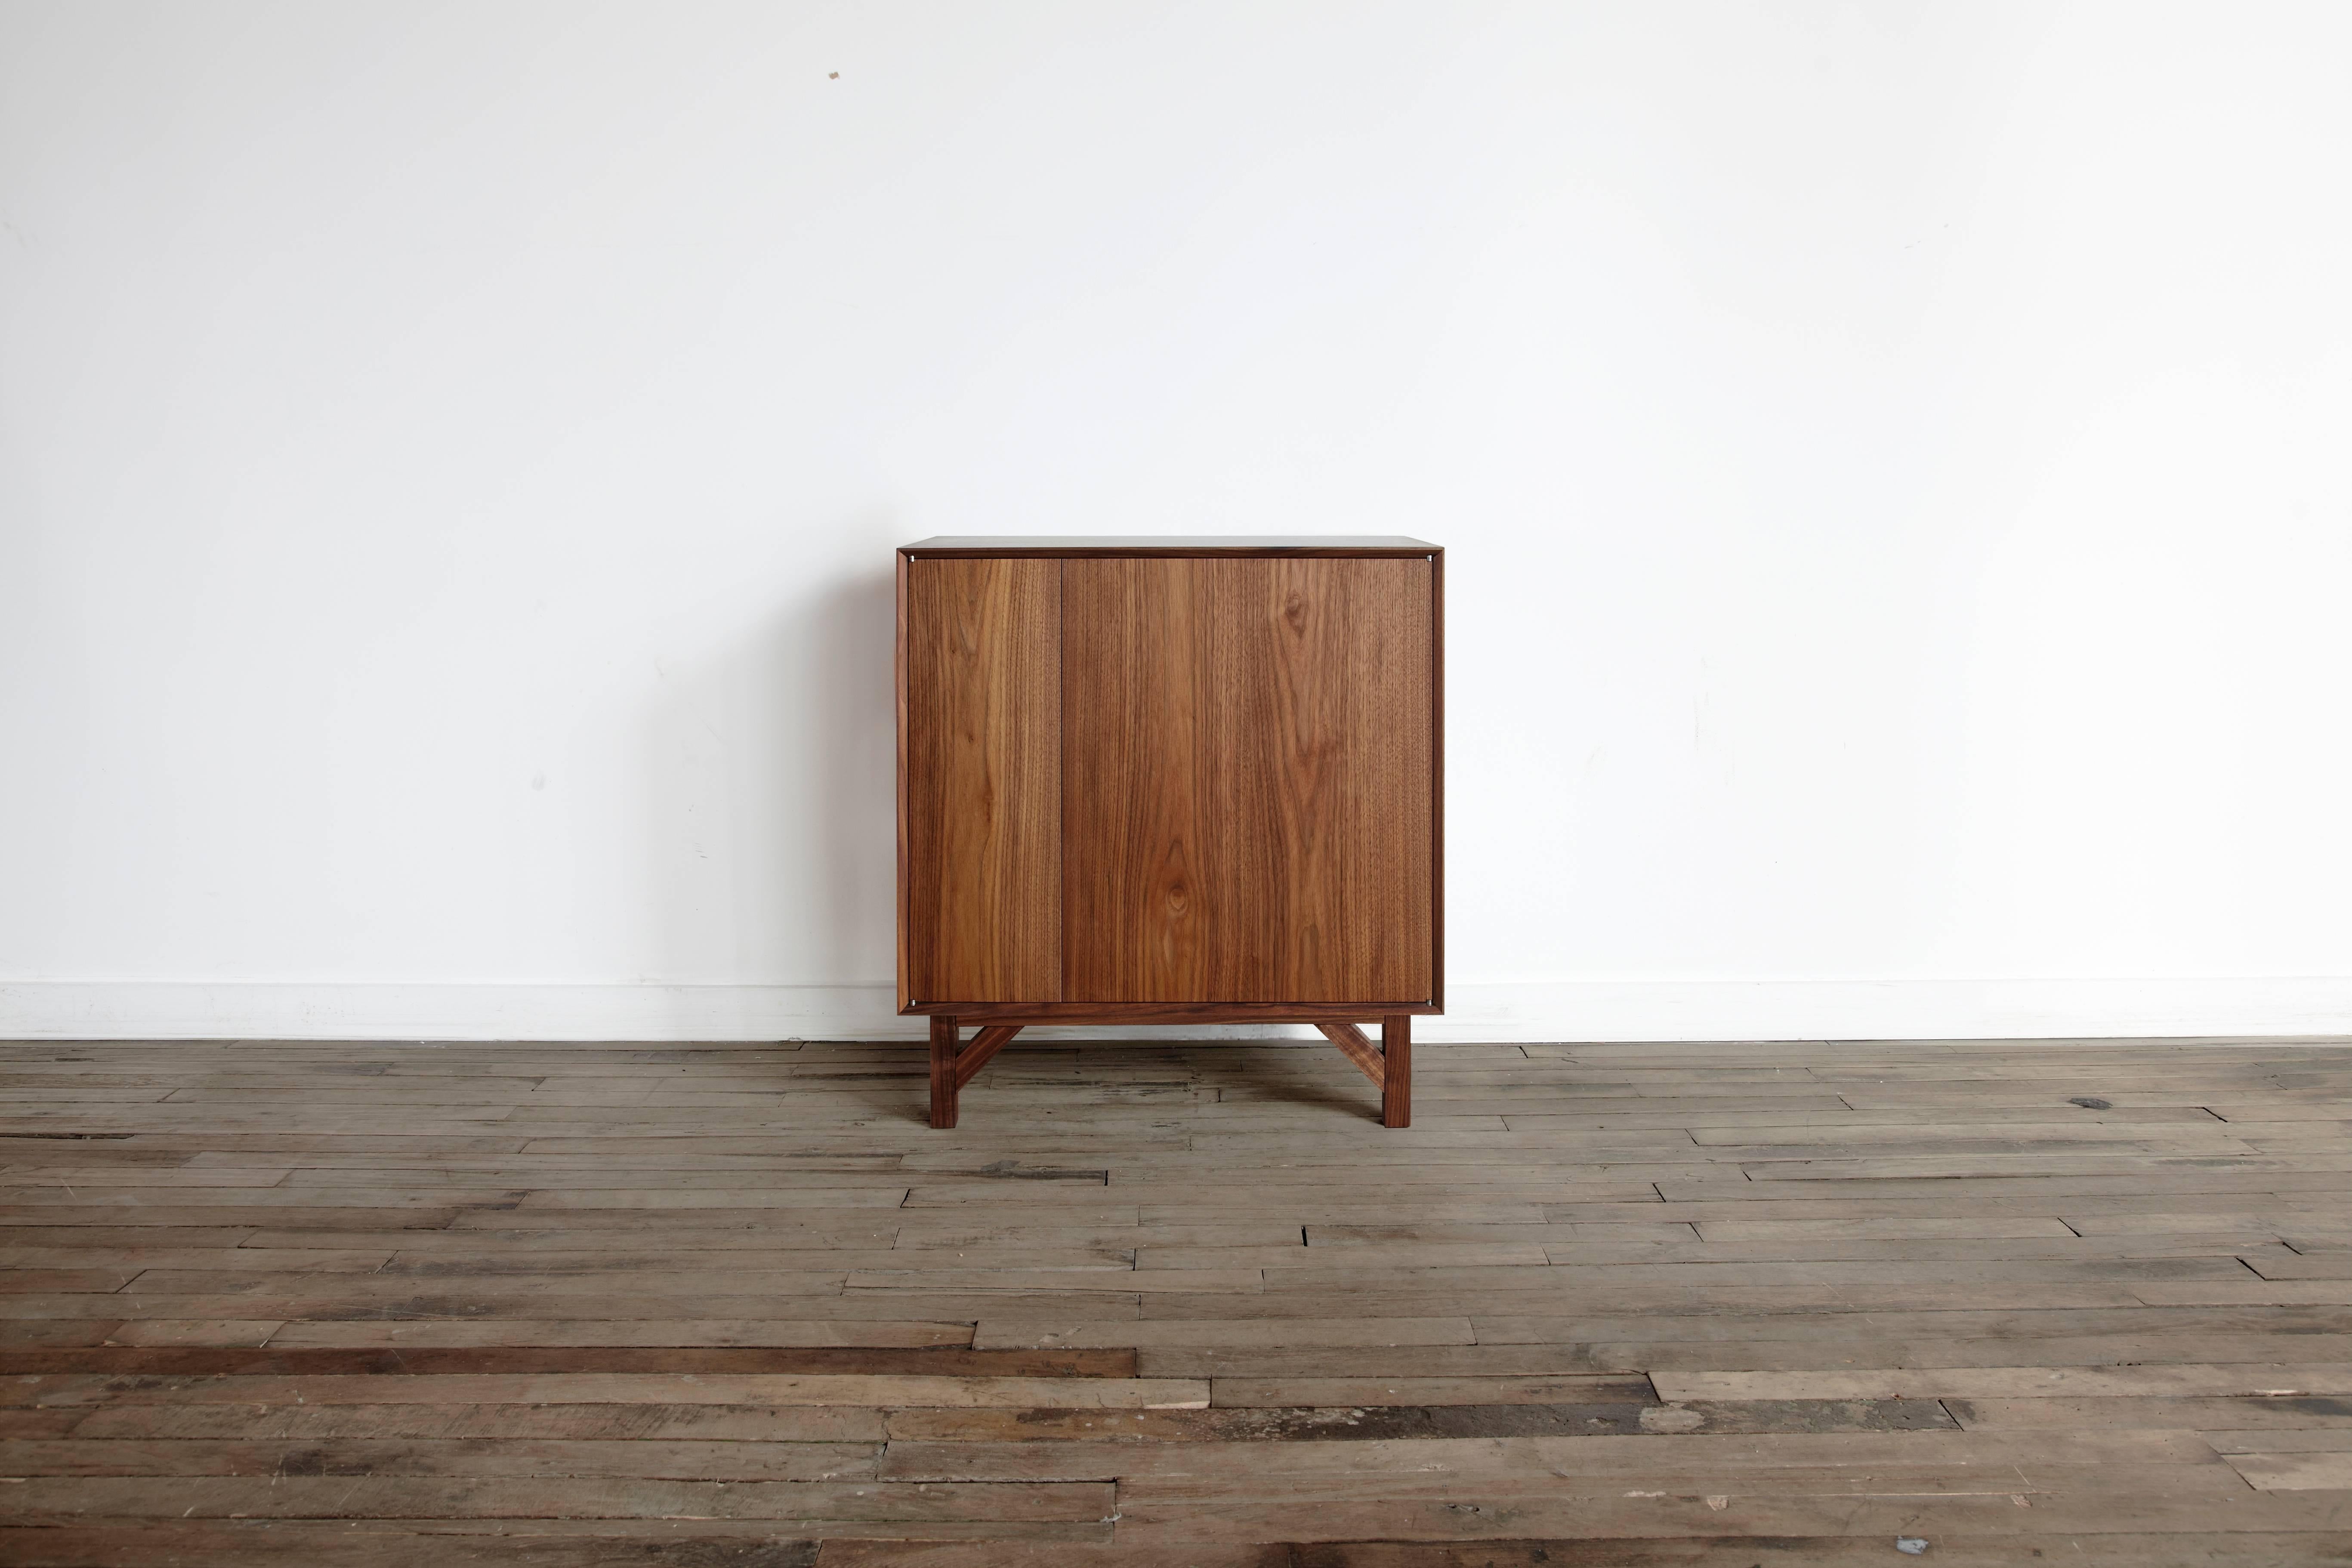 Solid wood hi-fi credenza touch latch doors hand rubbed oil and wax finish.

Dimensions:
33